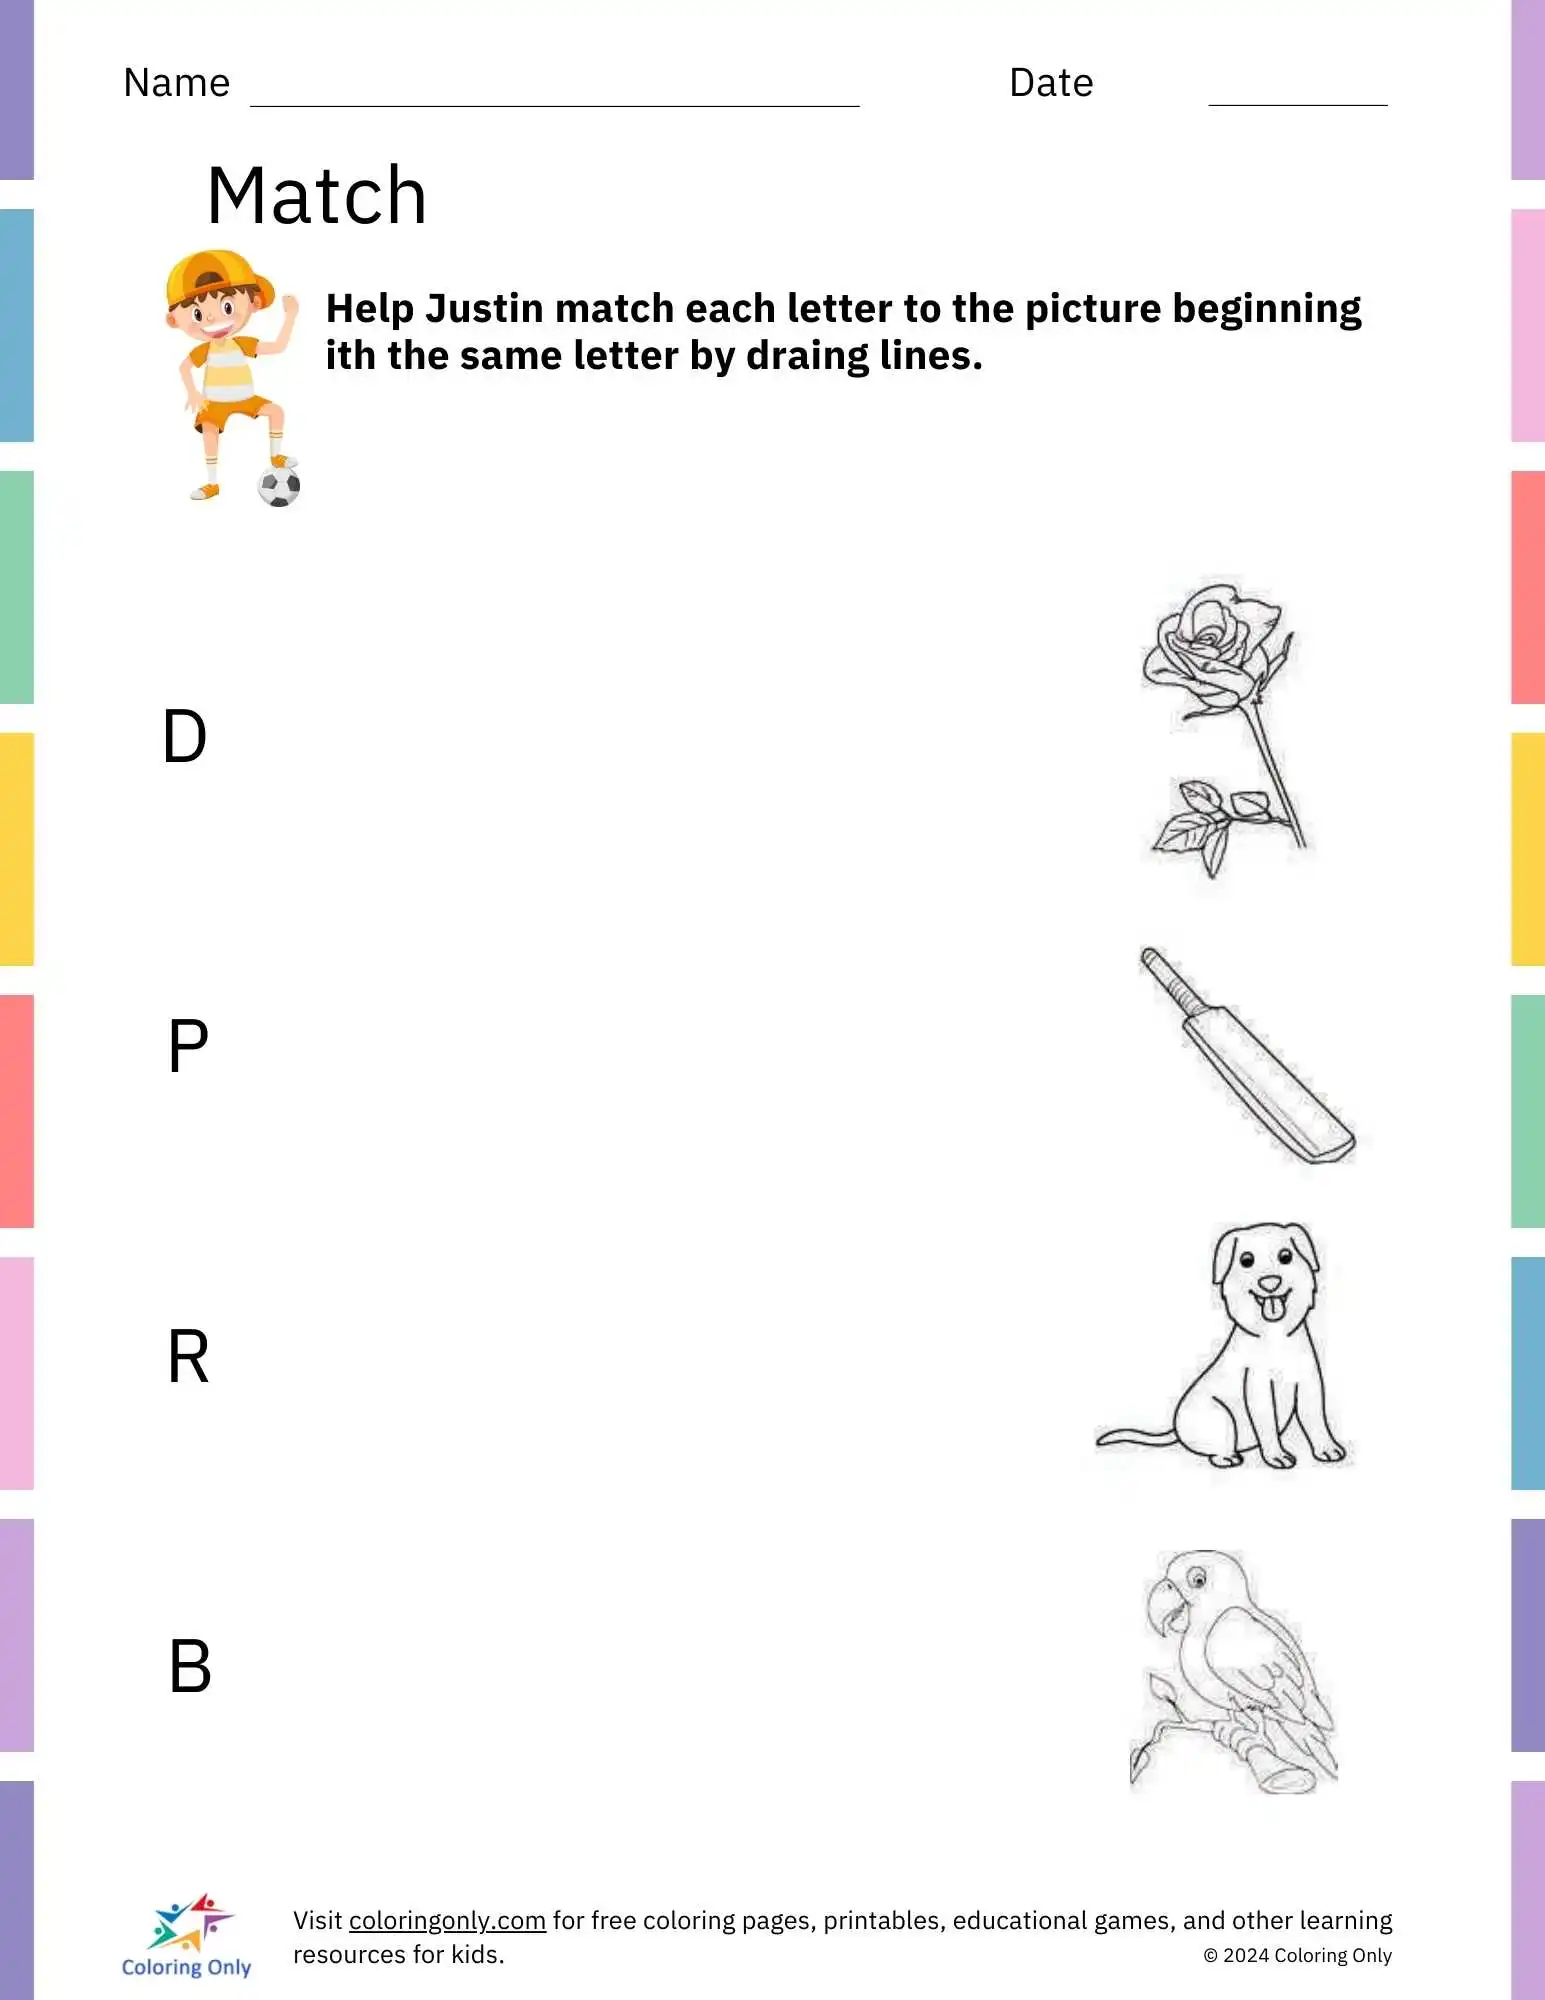 Learn phonics with Justin by matching letters and pictures in this free printable worksheet.